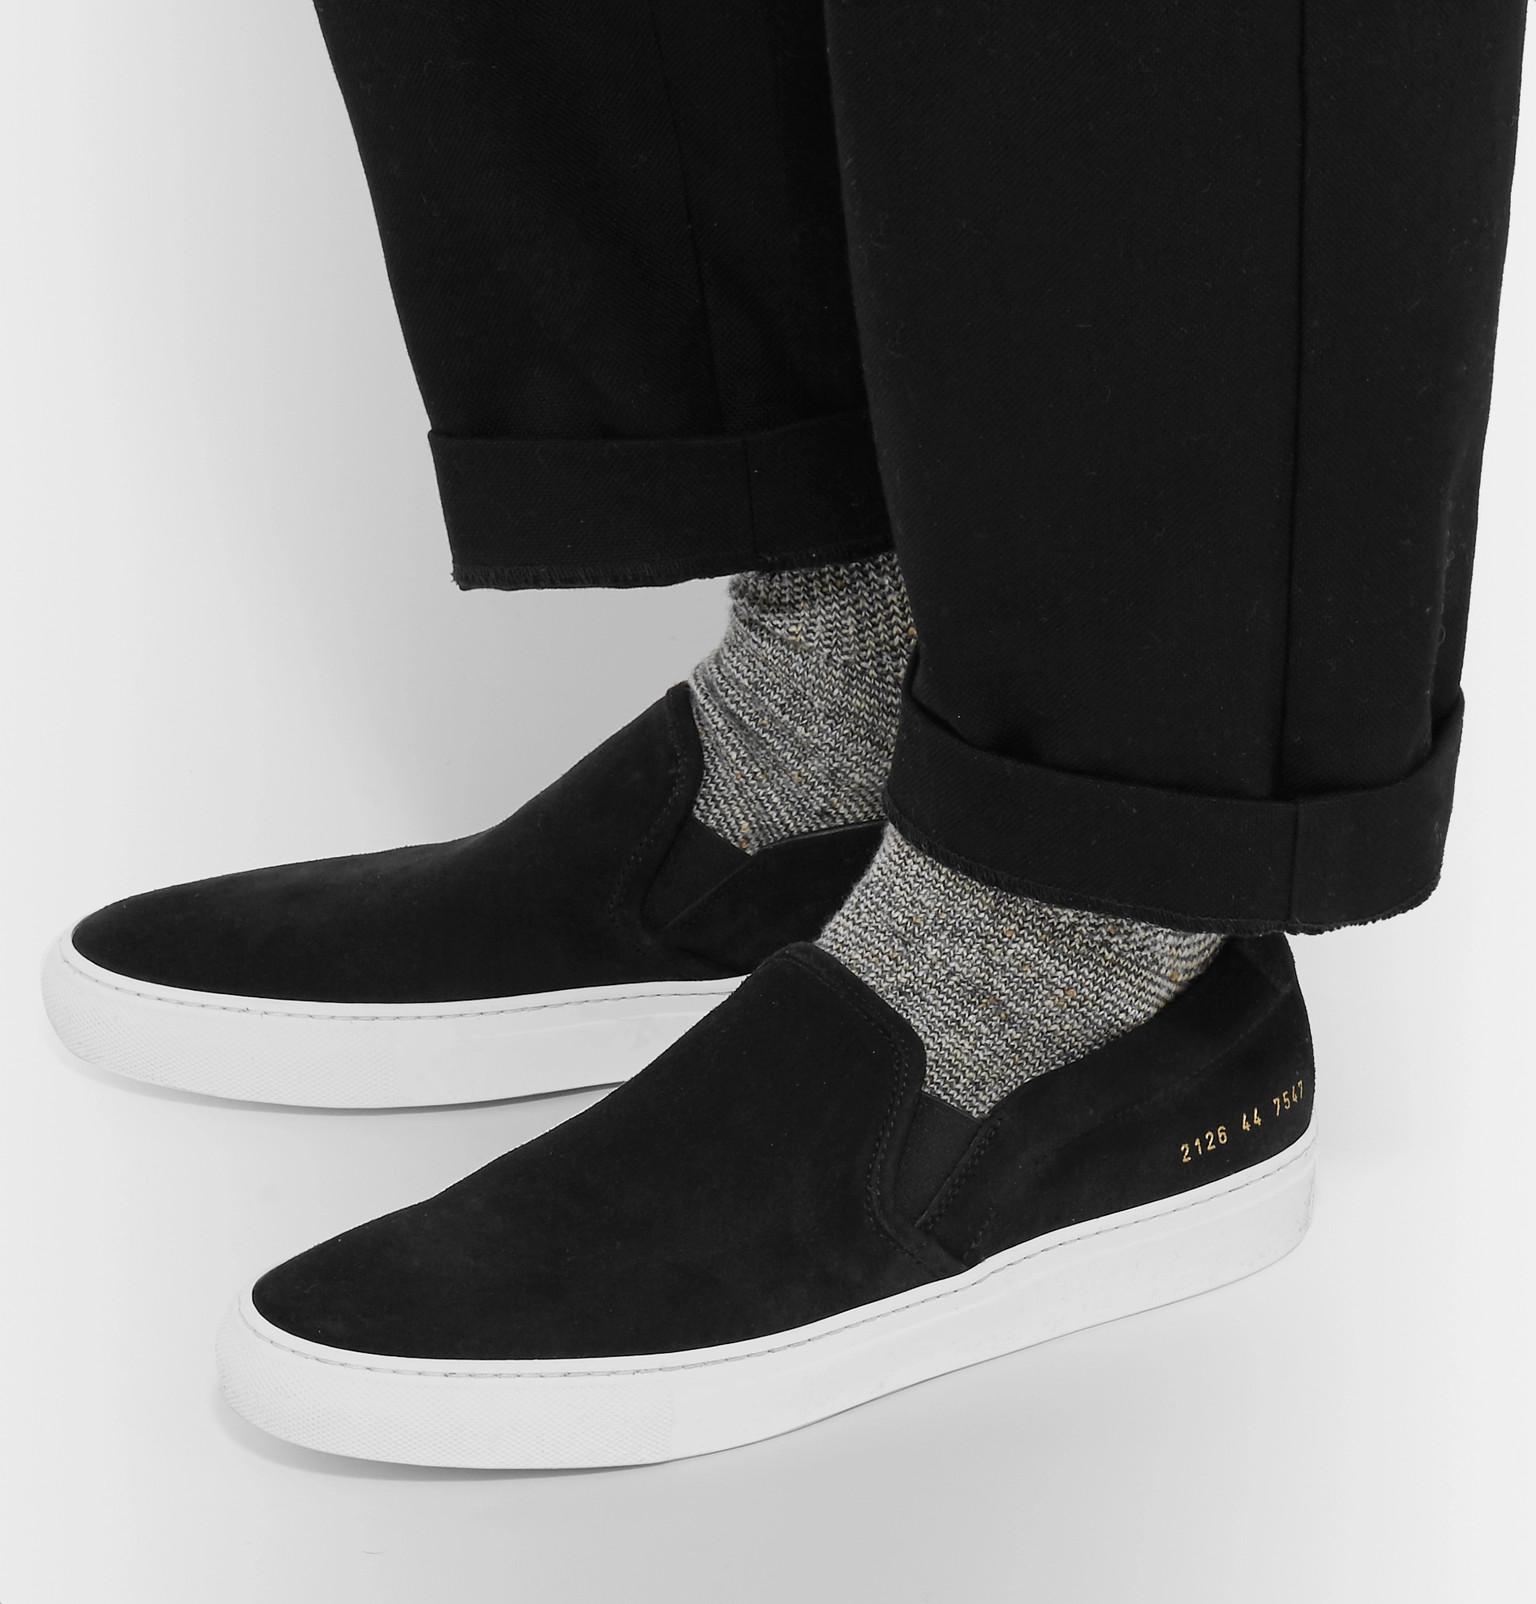 Common Projects Suede Slip-on Sneakers in Black for Men - Lyst